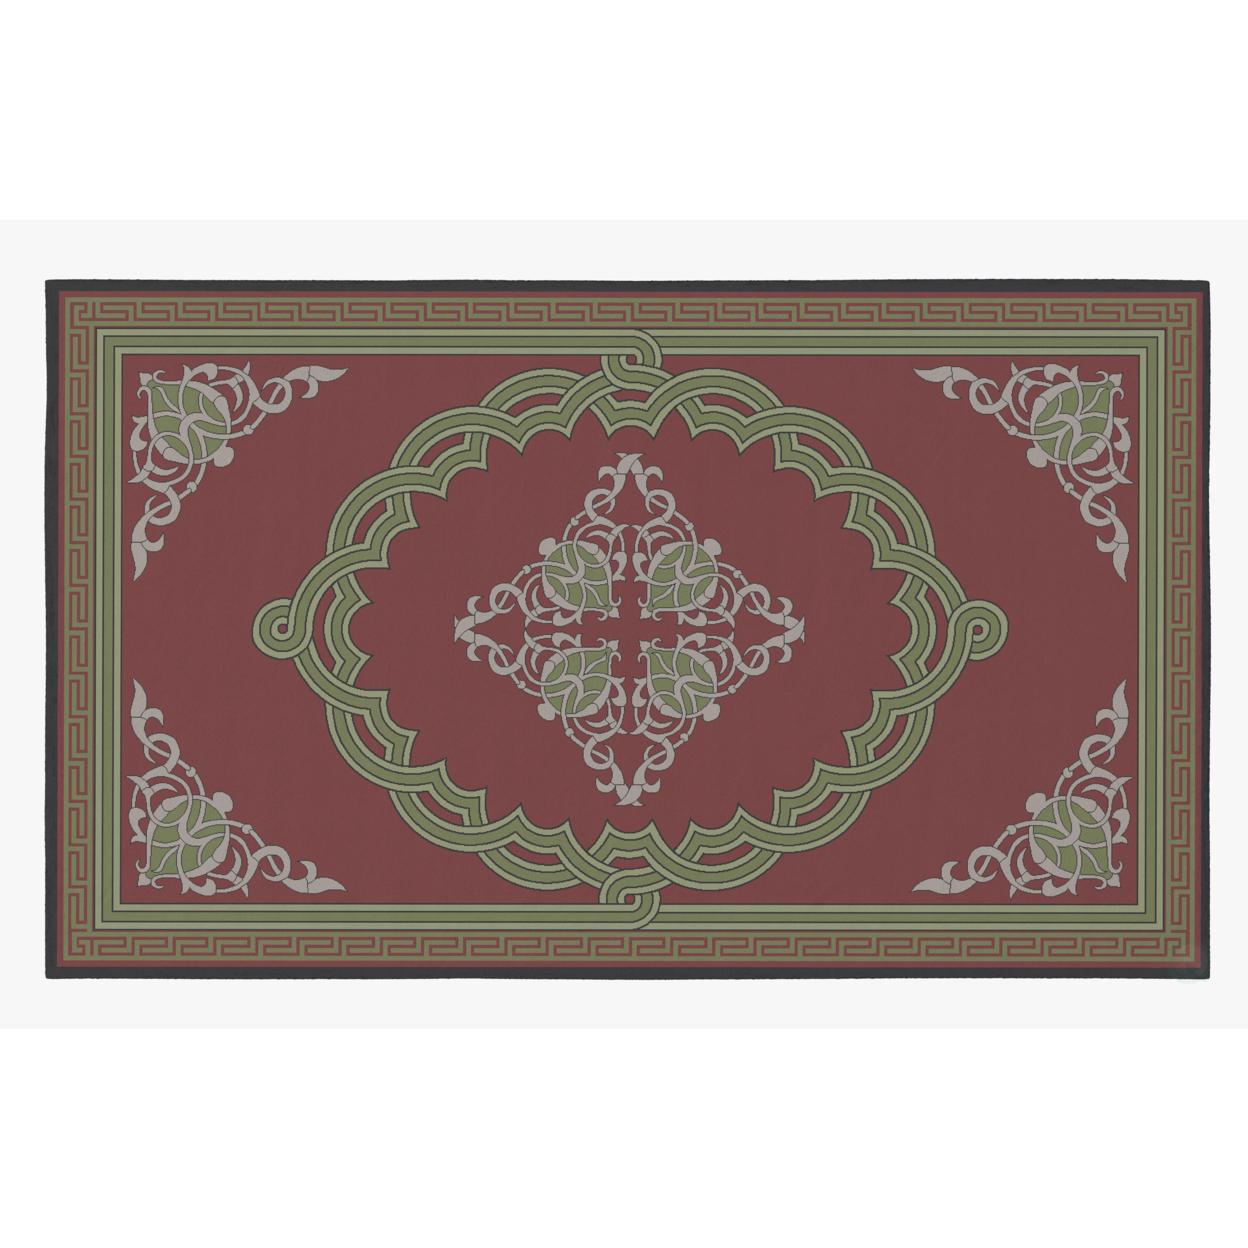 Deerlux Transitional Living Room Area Rug With Nonslip Backing, Red Medallion Pattern - 5 X 7